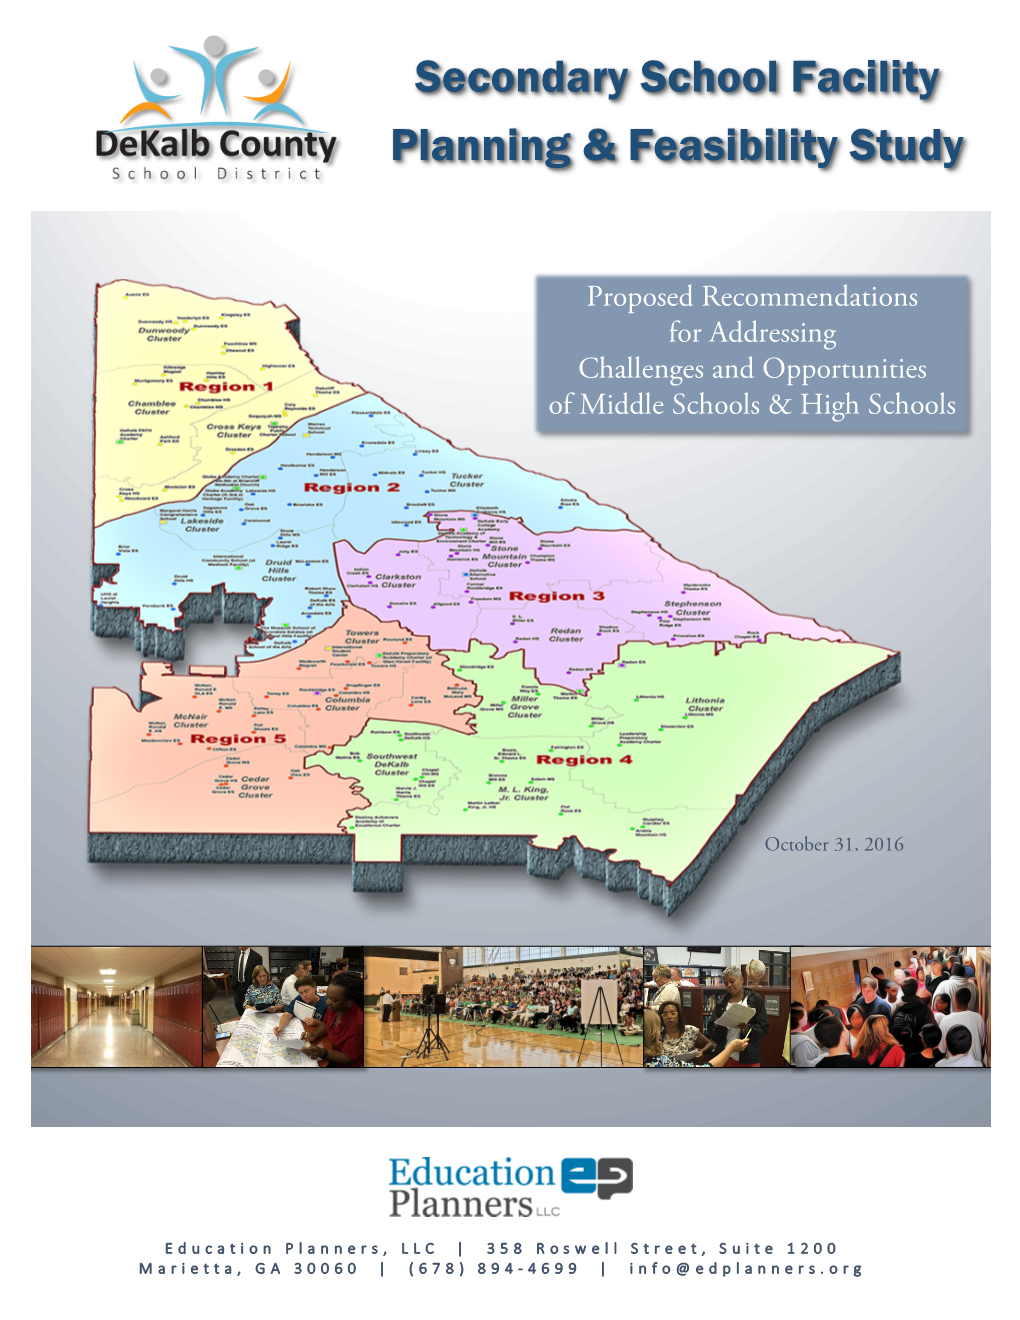 Secondary School Facility Planning & Feasibility Study